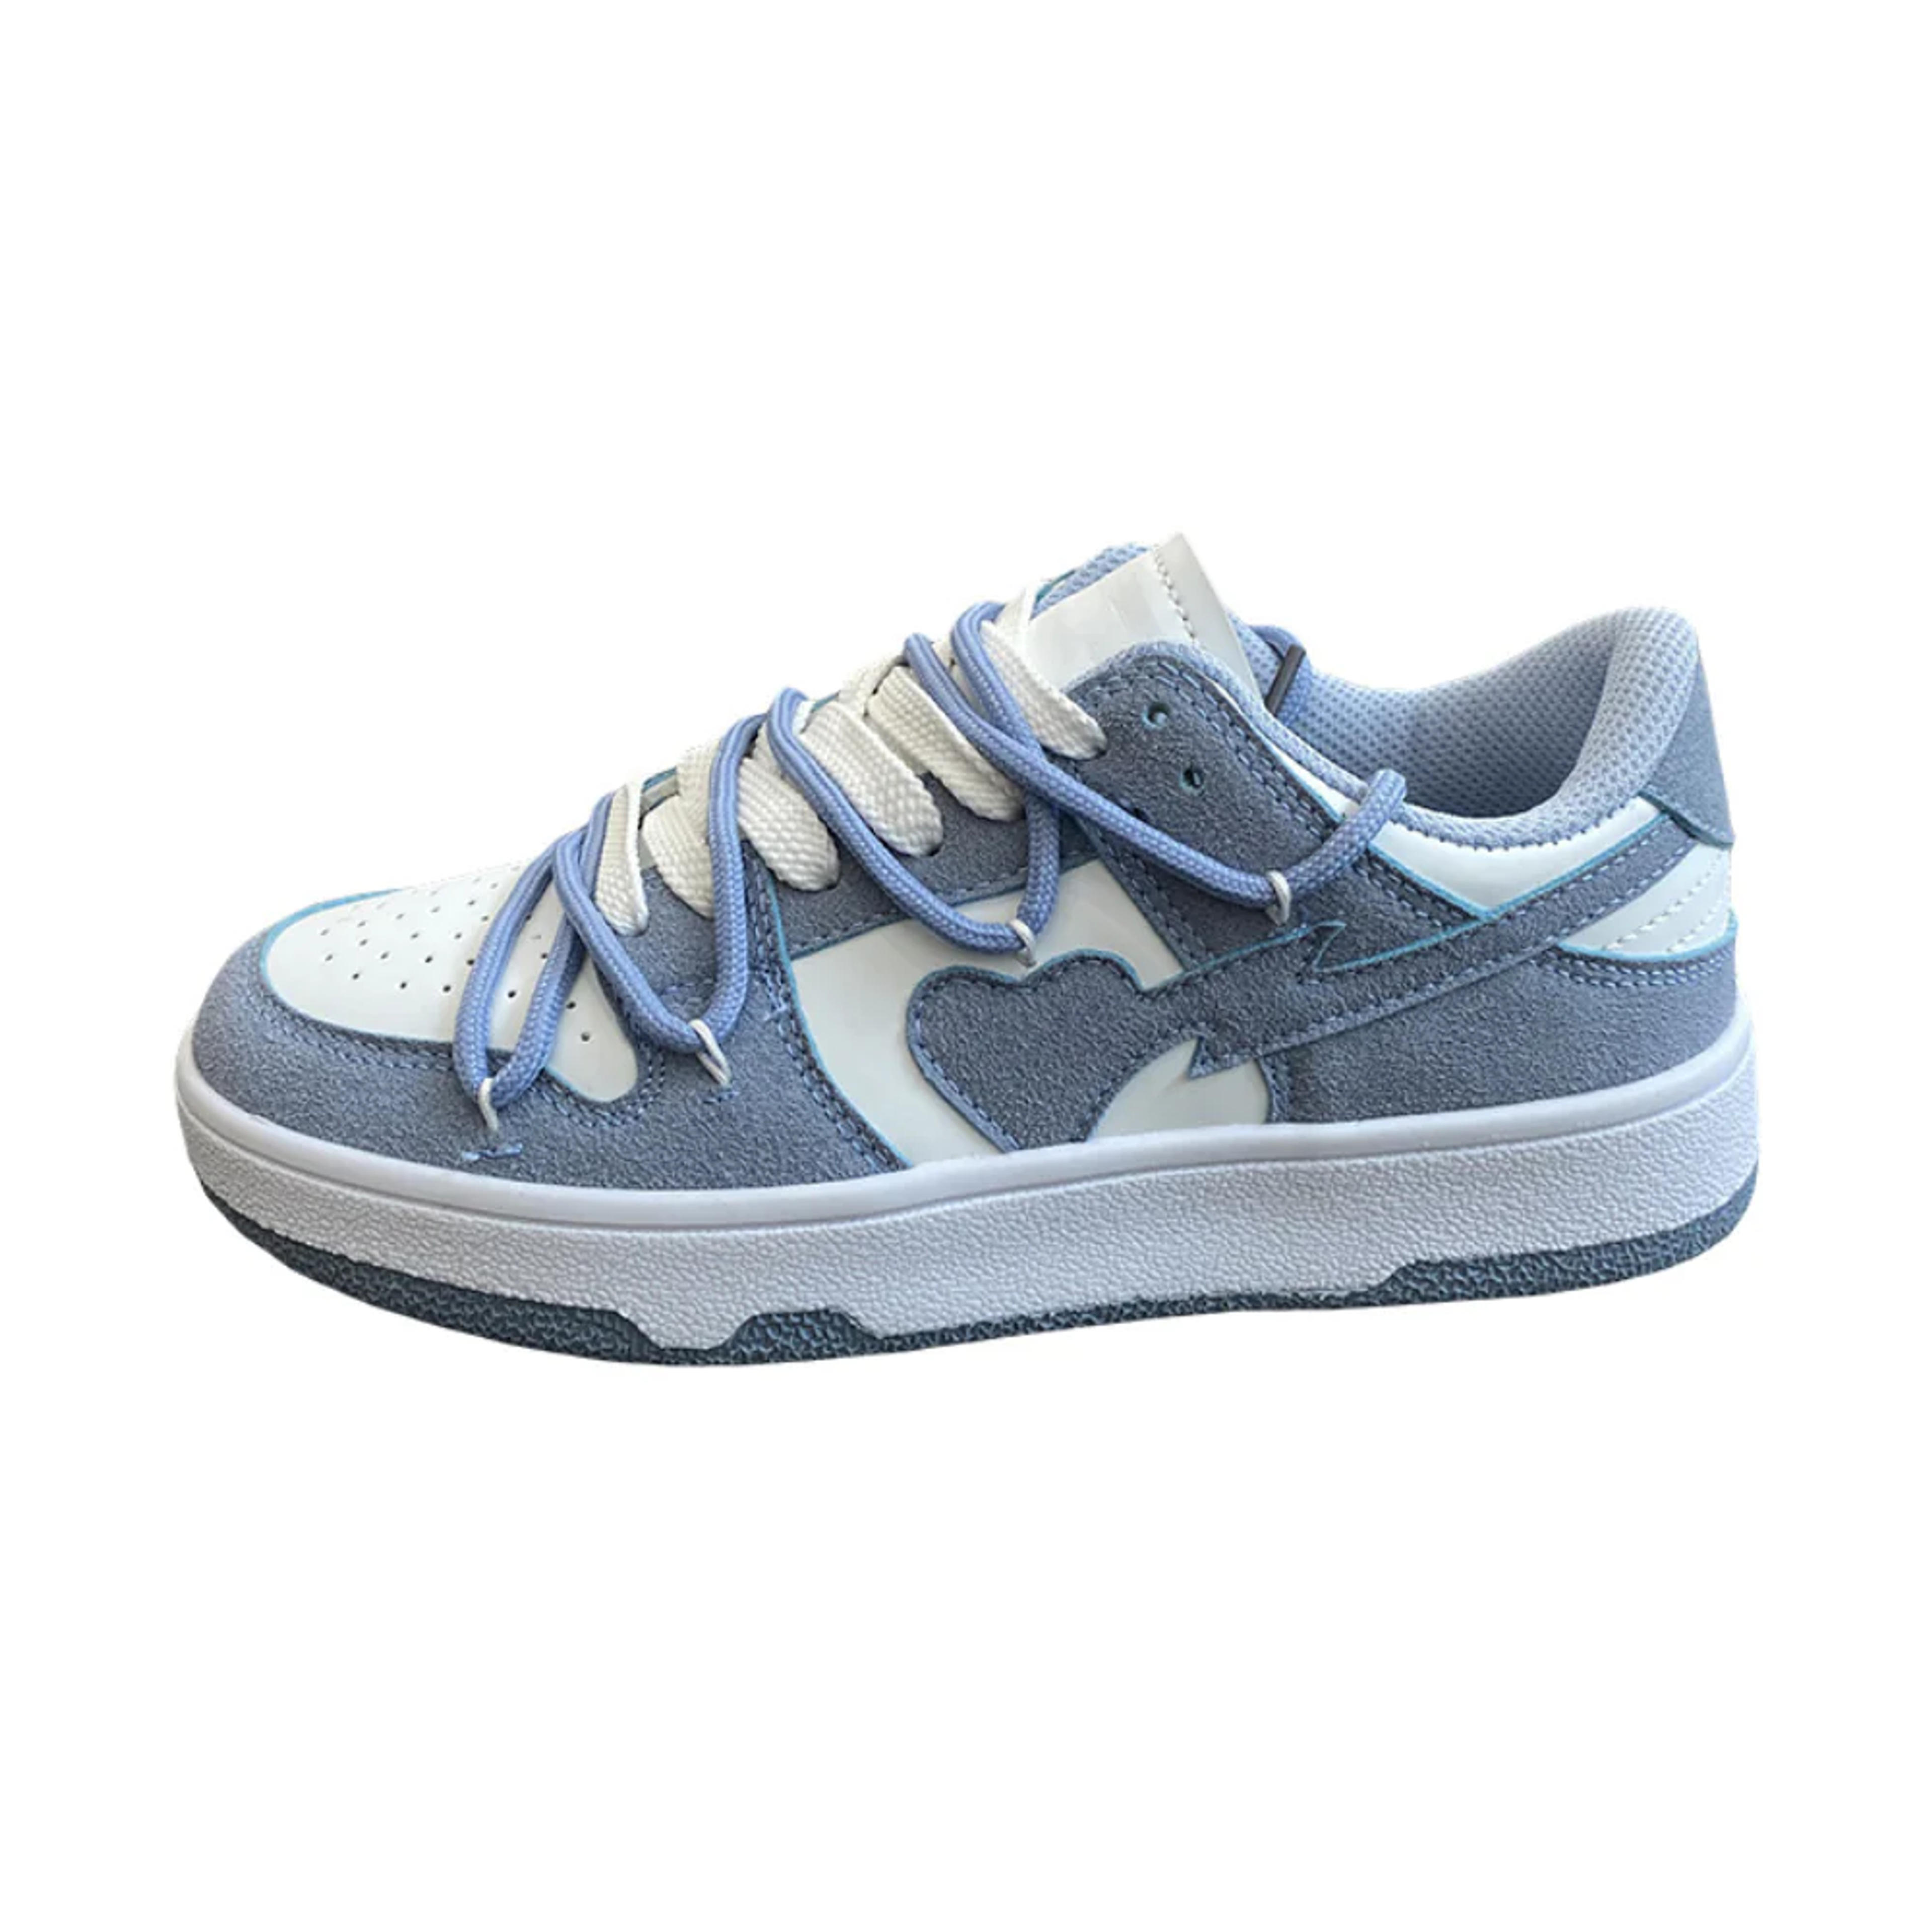 Street Heart Stitching Casual Sneakers - Blue / US 9.5 / EU 44